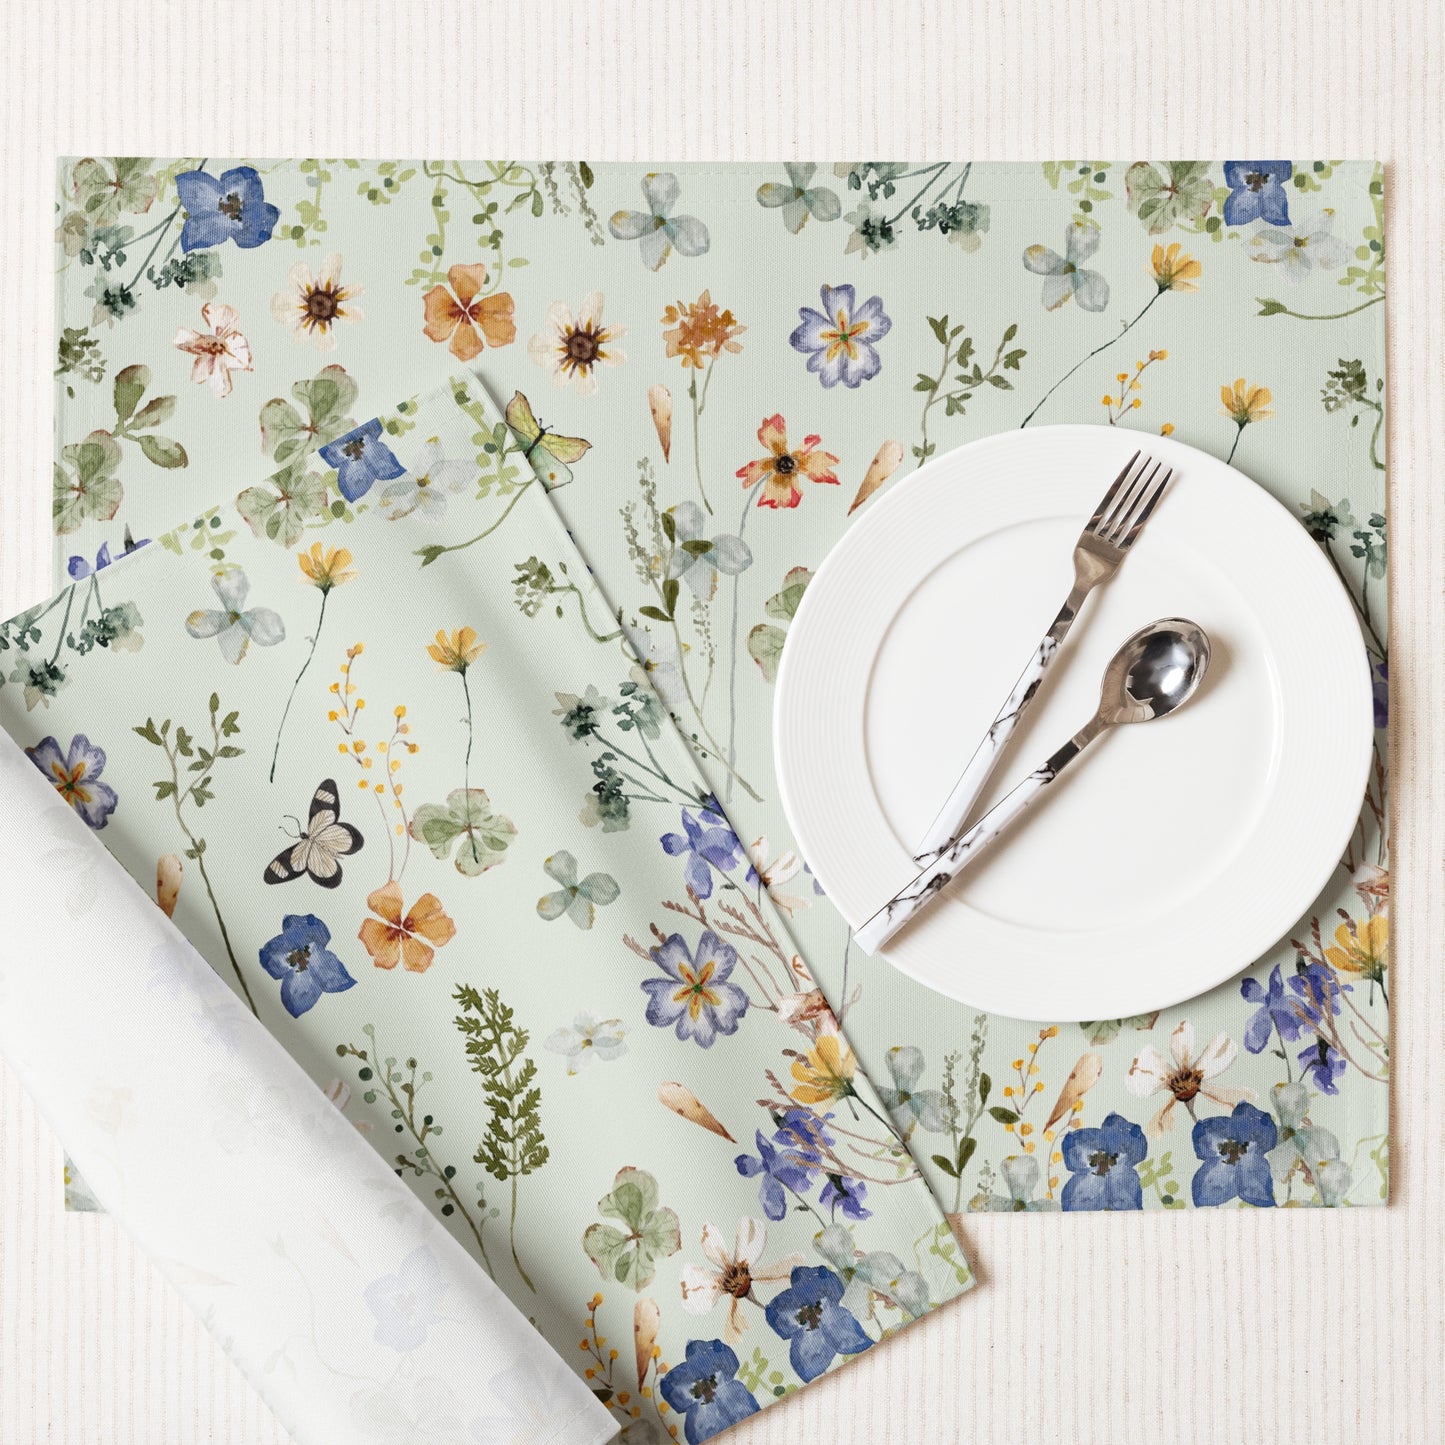 Wildflowers Floral PLACEMAT - White Tone from BLUE WATER SONGS with plate on it